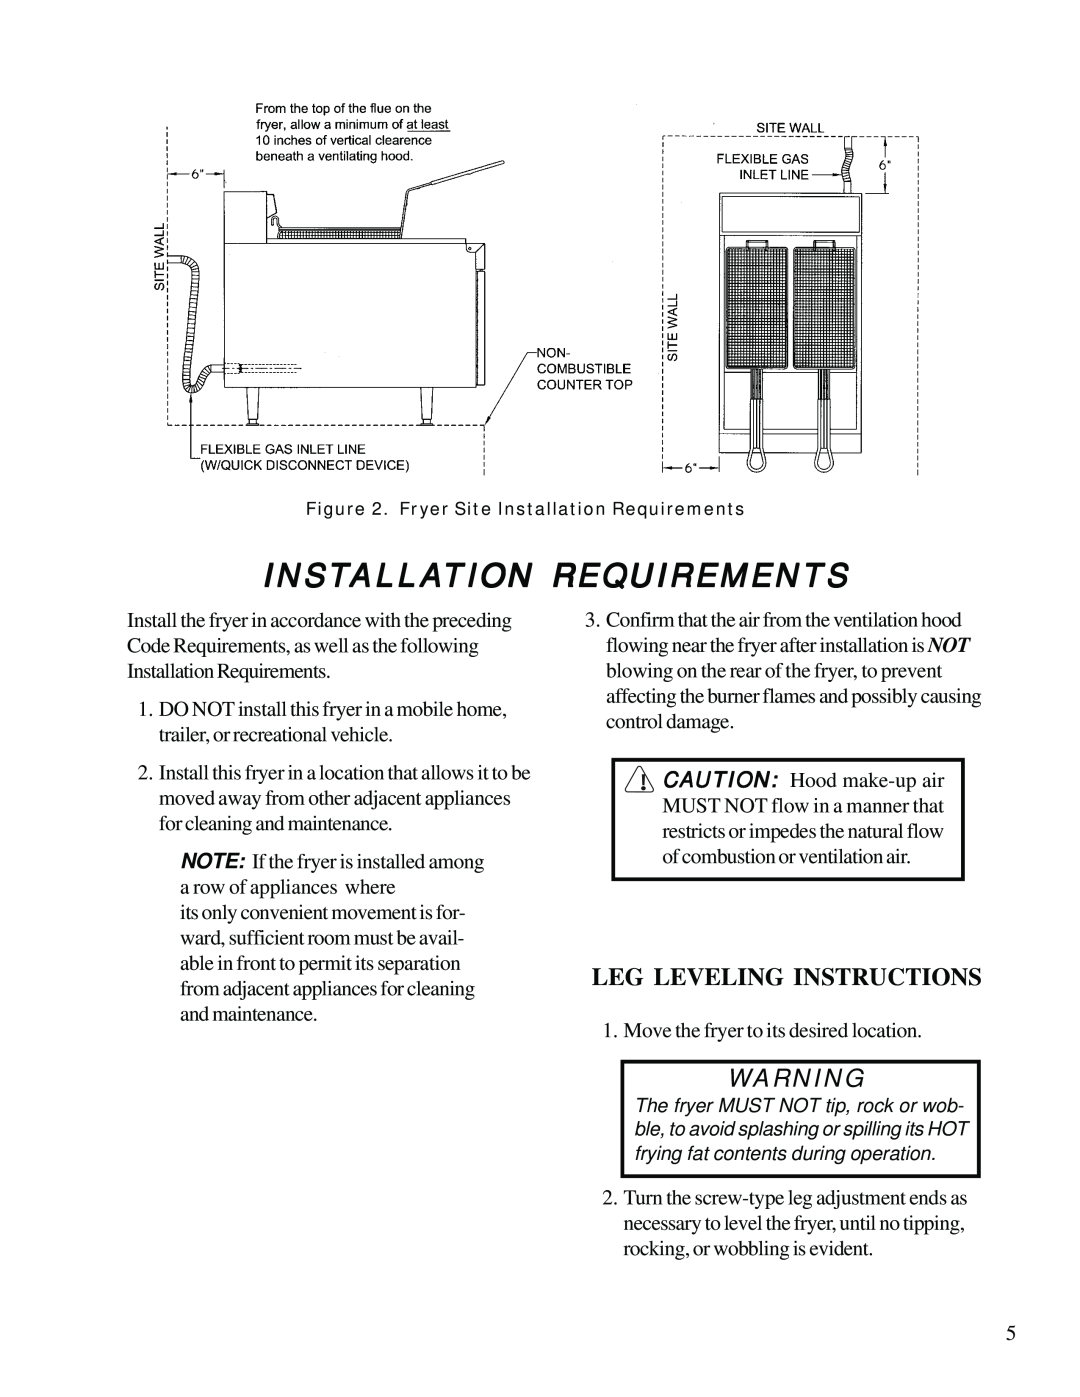 Anetsberger Brothers CF14 warranty Installation Requirements, Leg Leveling Instructions 